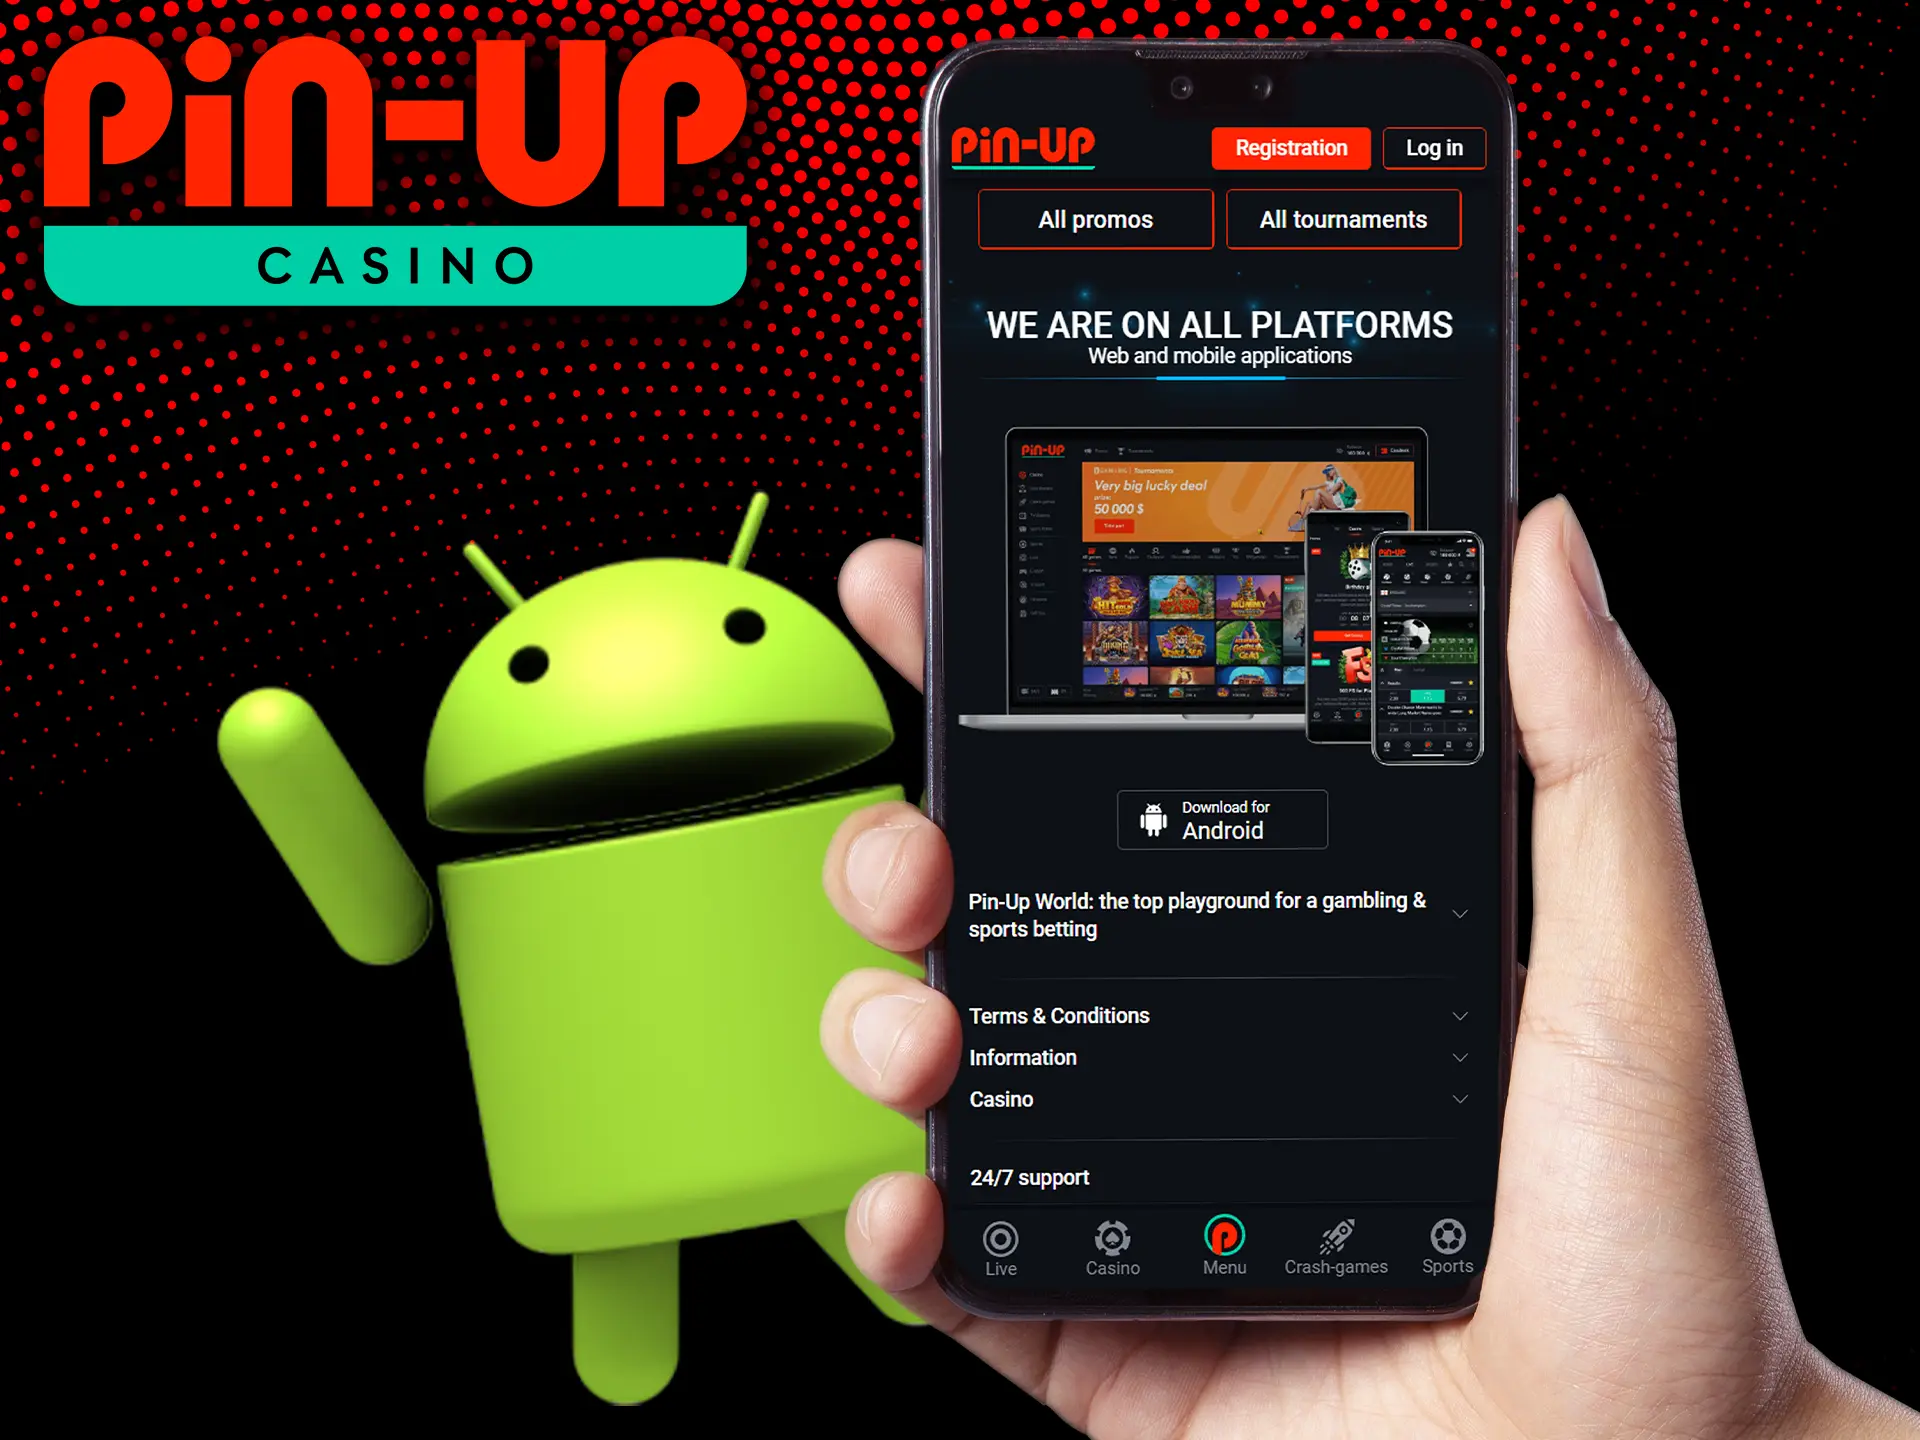 Smartphone users can download and install the app for Android from the official site of Pin-Up Casino.